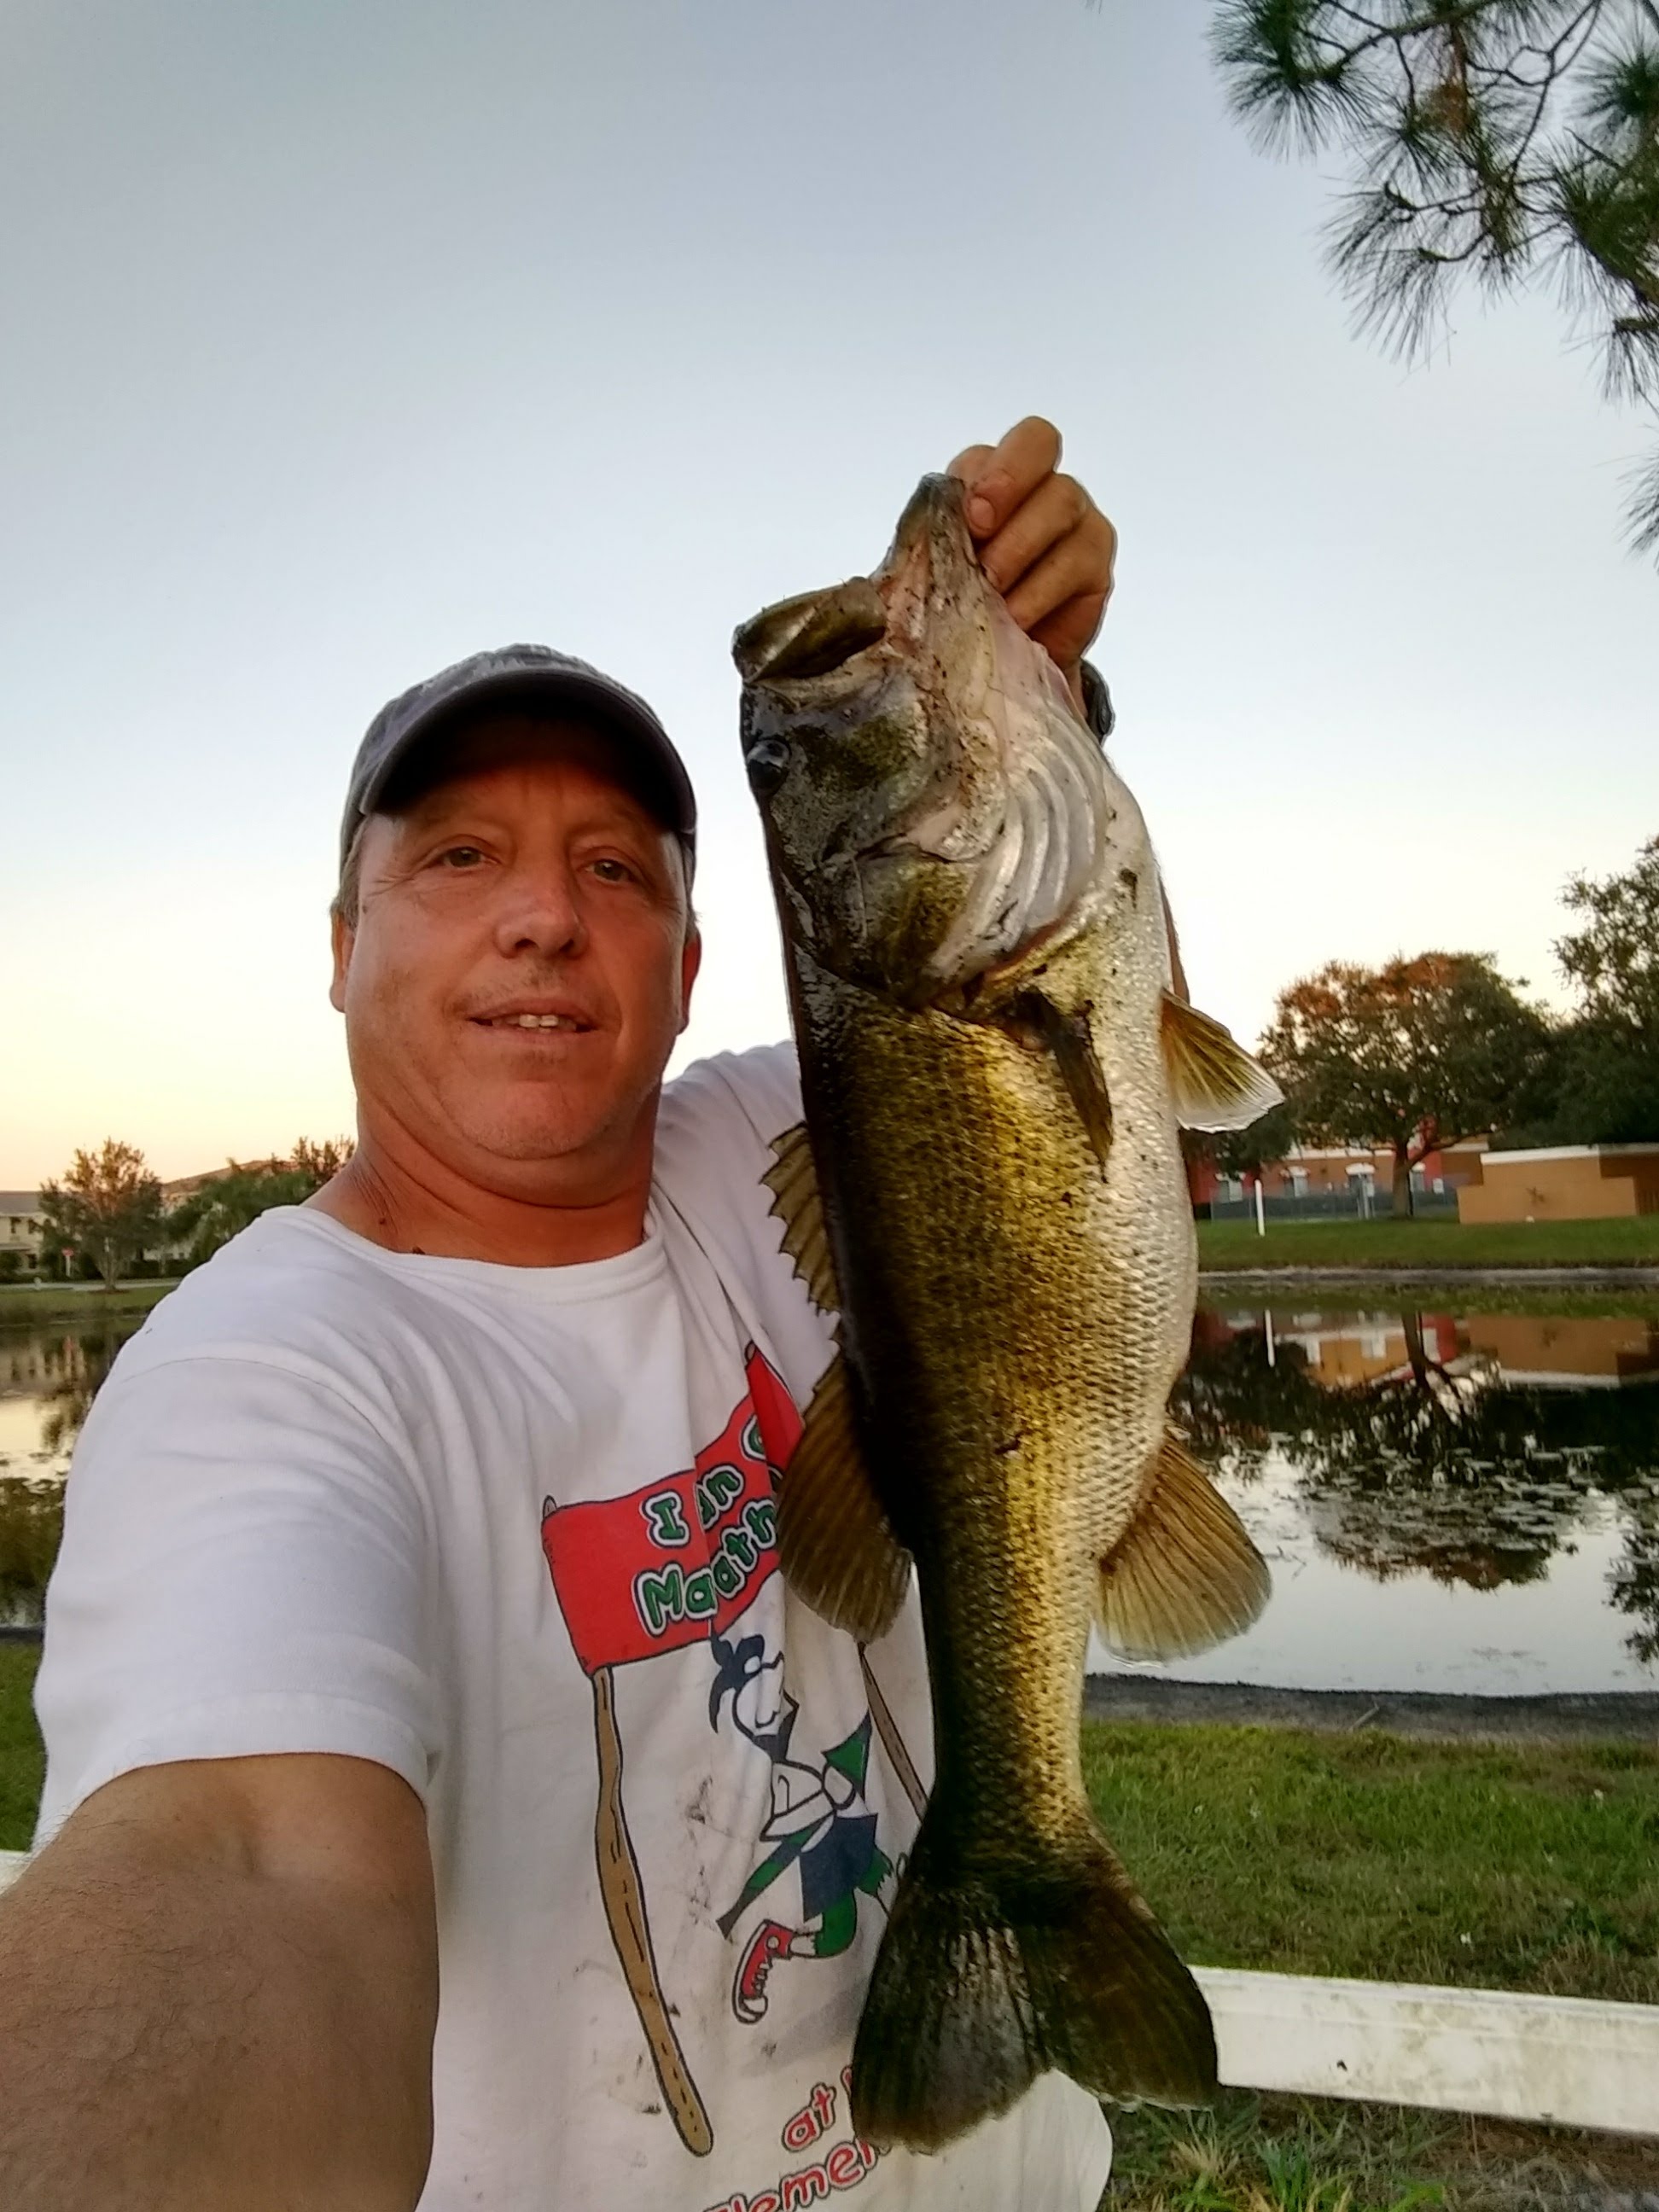 Closed Face Spincast Reels - Any Good For Bass Fishing? - Fishing Rods,  Reels, Line, and Knots - Bass Fishing Forums